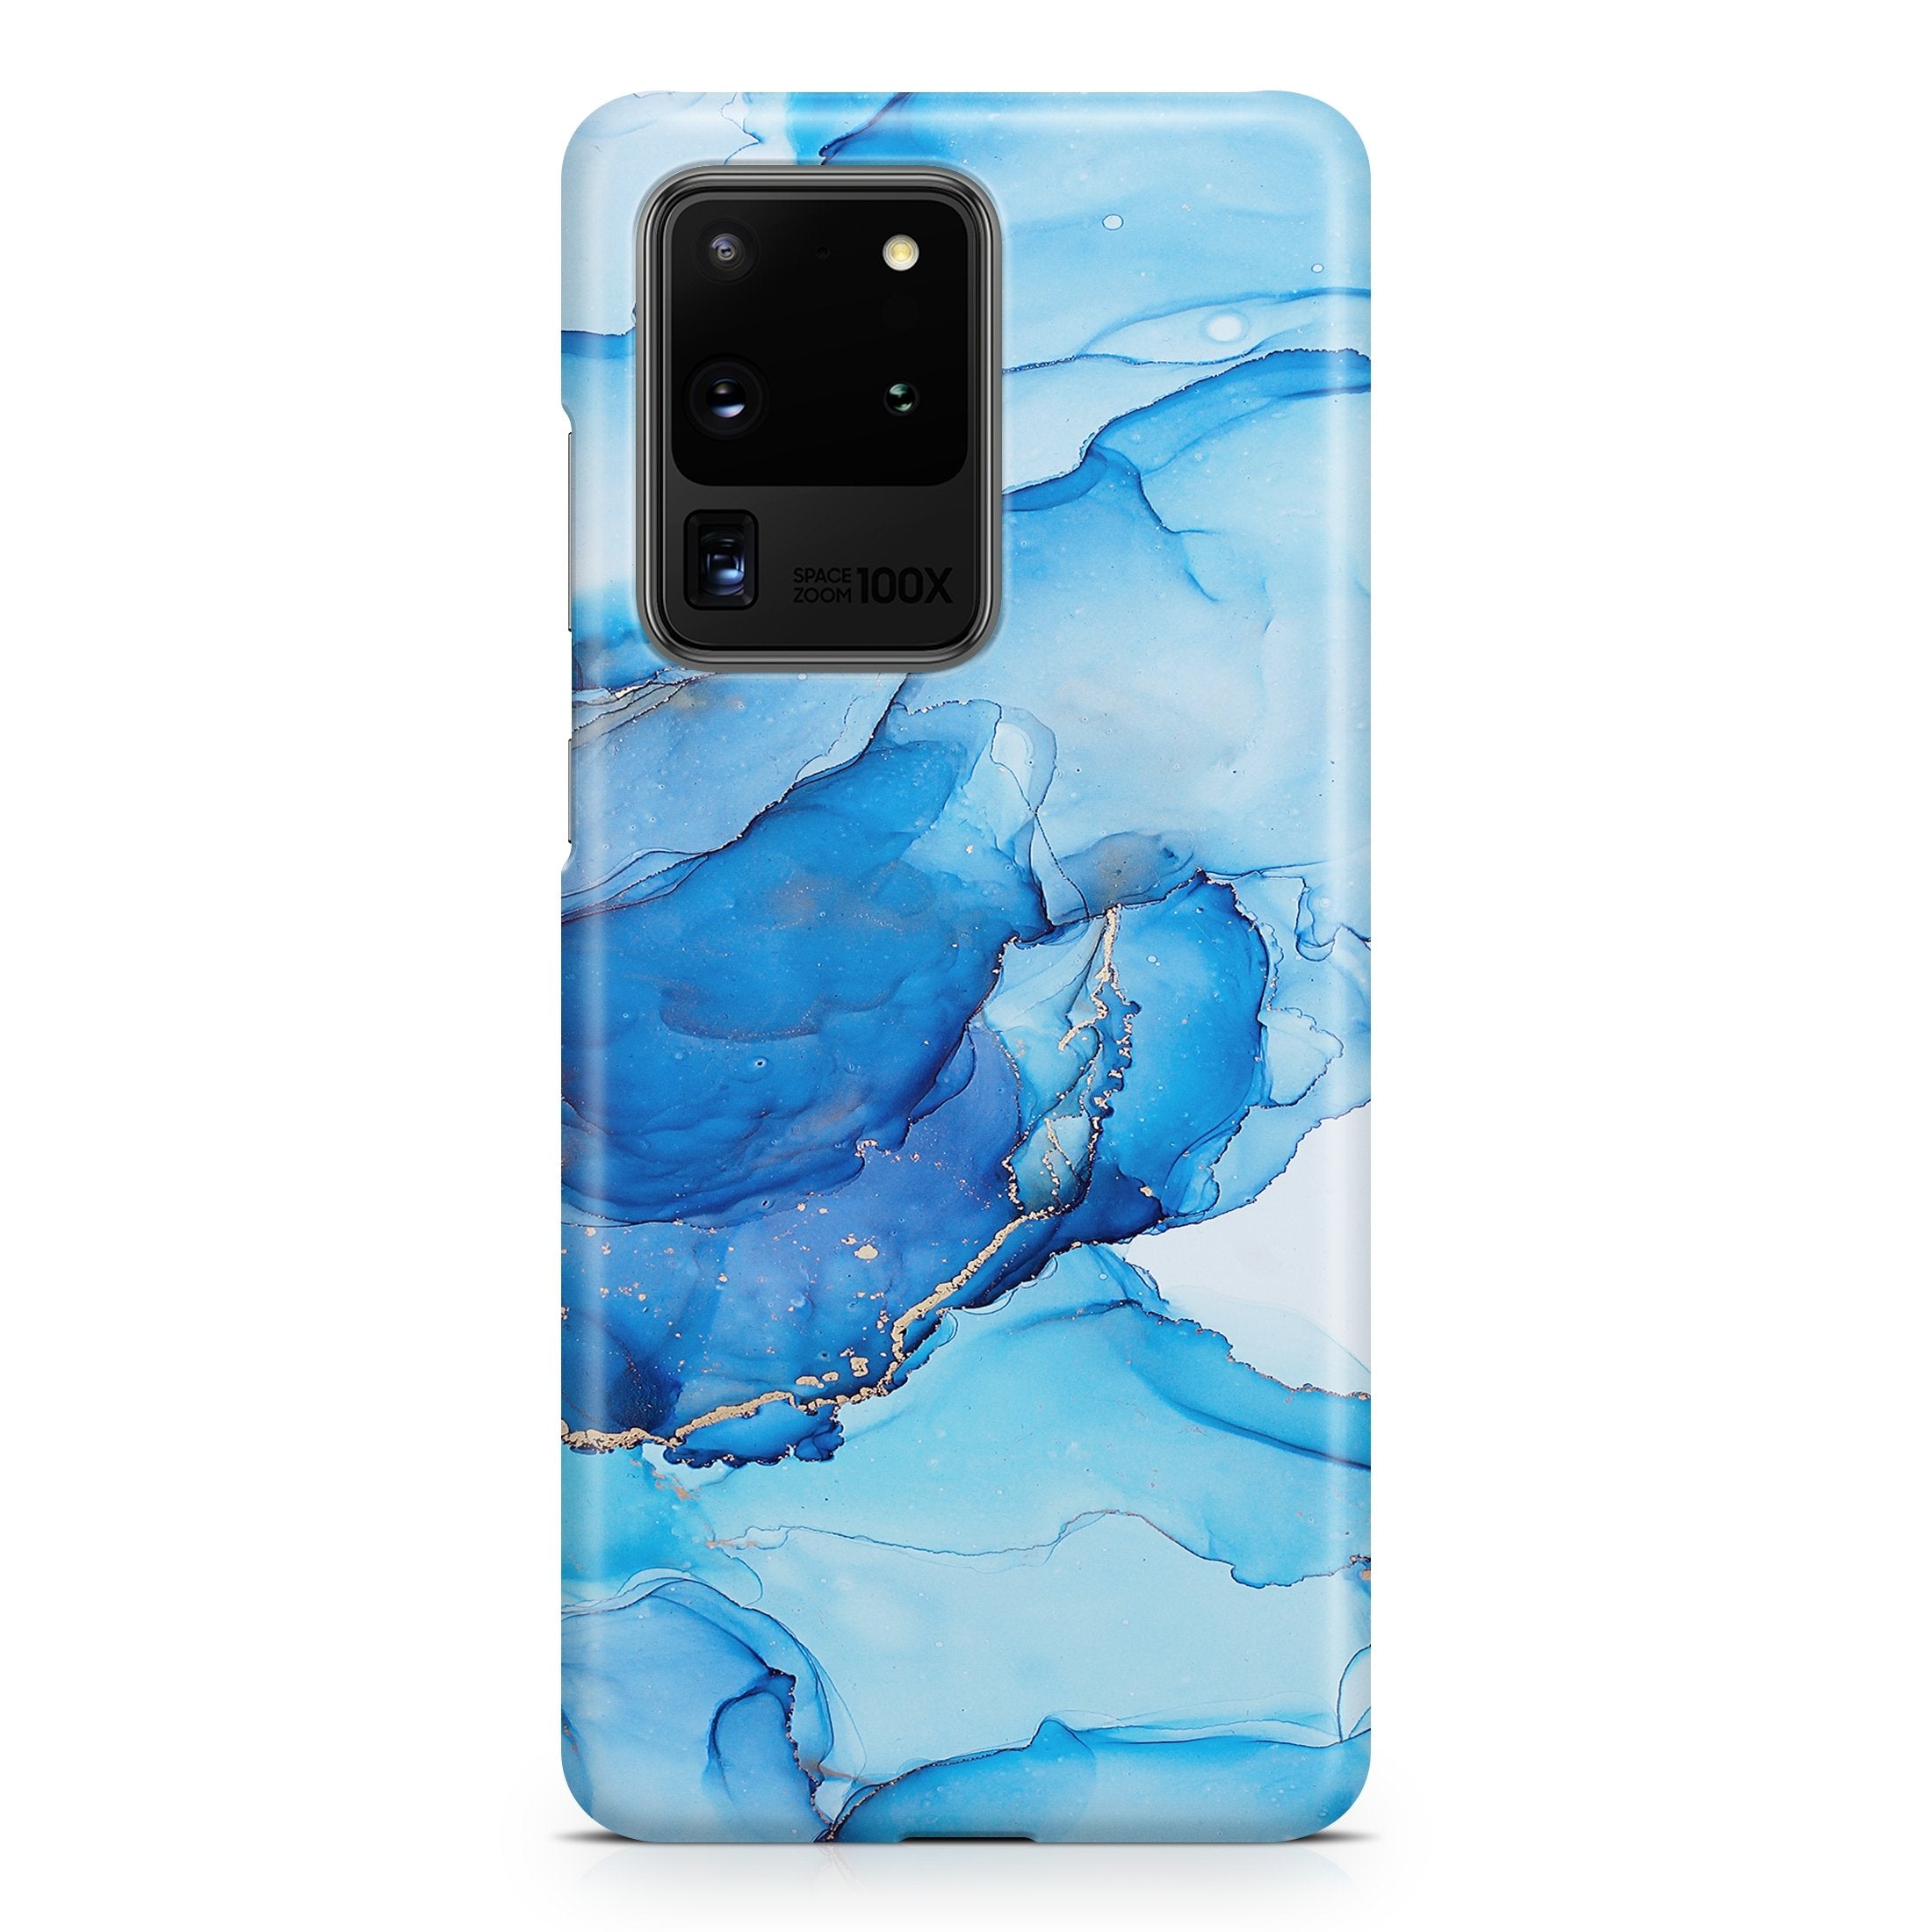 Blue Alcohol Ink - Samsung phone case designs by CaseSwagger